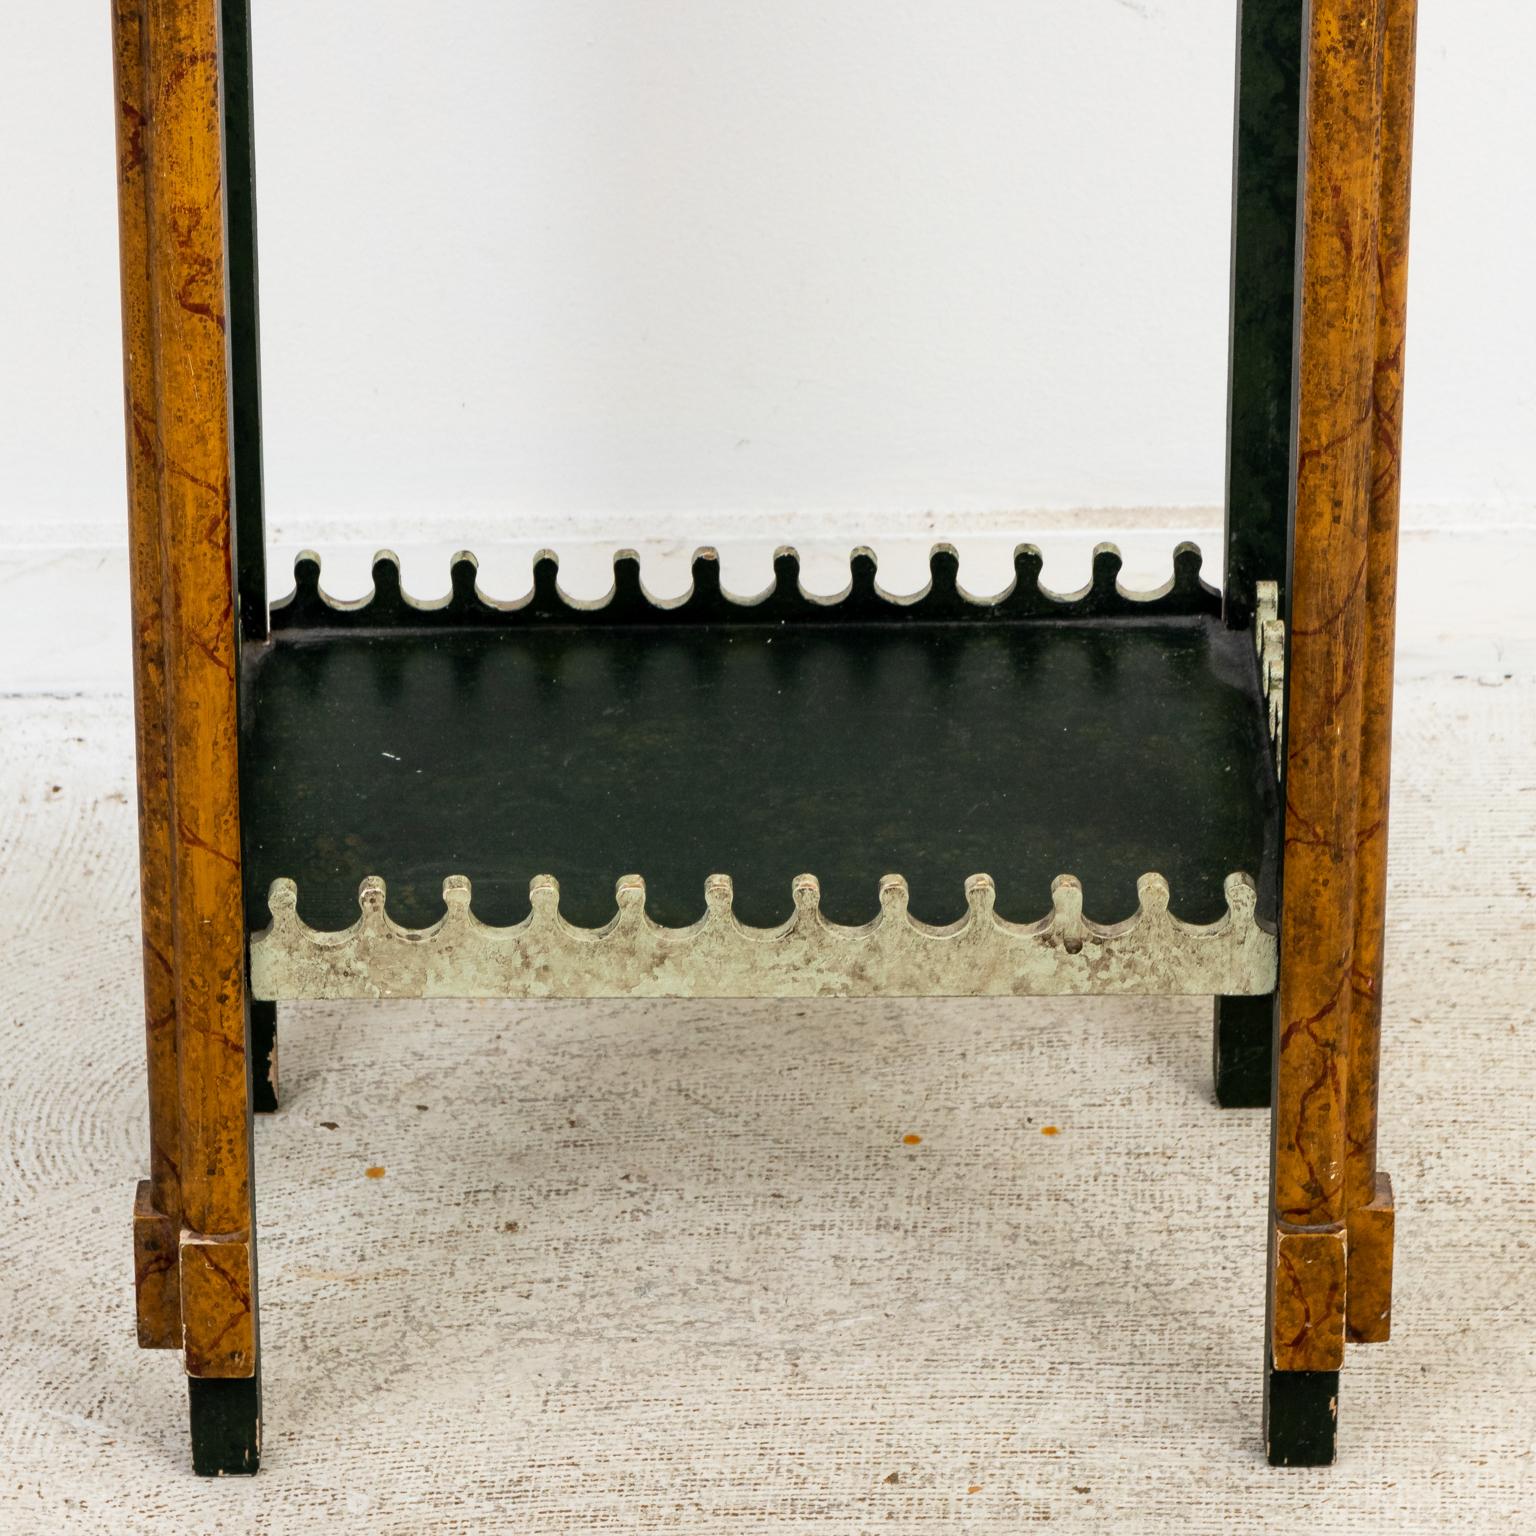 Circa 1990s faux painted Gothic style bird cage with pointed arches, trefoil tracery, and bottom shelf. Origin unknown. Please note of wear consistent with age.